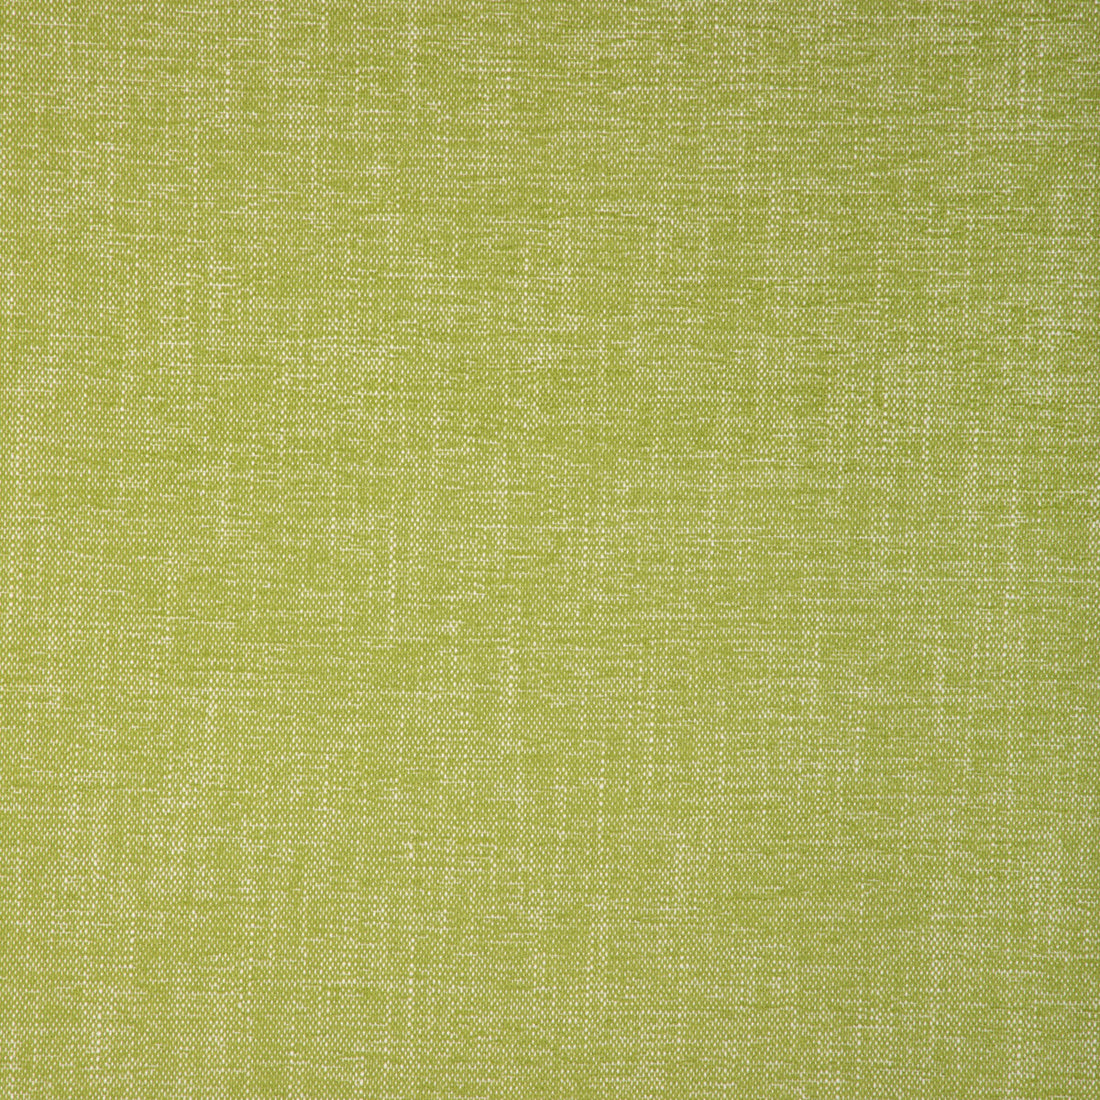 Kravet Design fabric in 36794-23 color - pattern 36794.23.0 - by Kravet Design in the Sea Island Inside Out collection